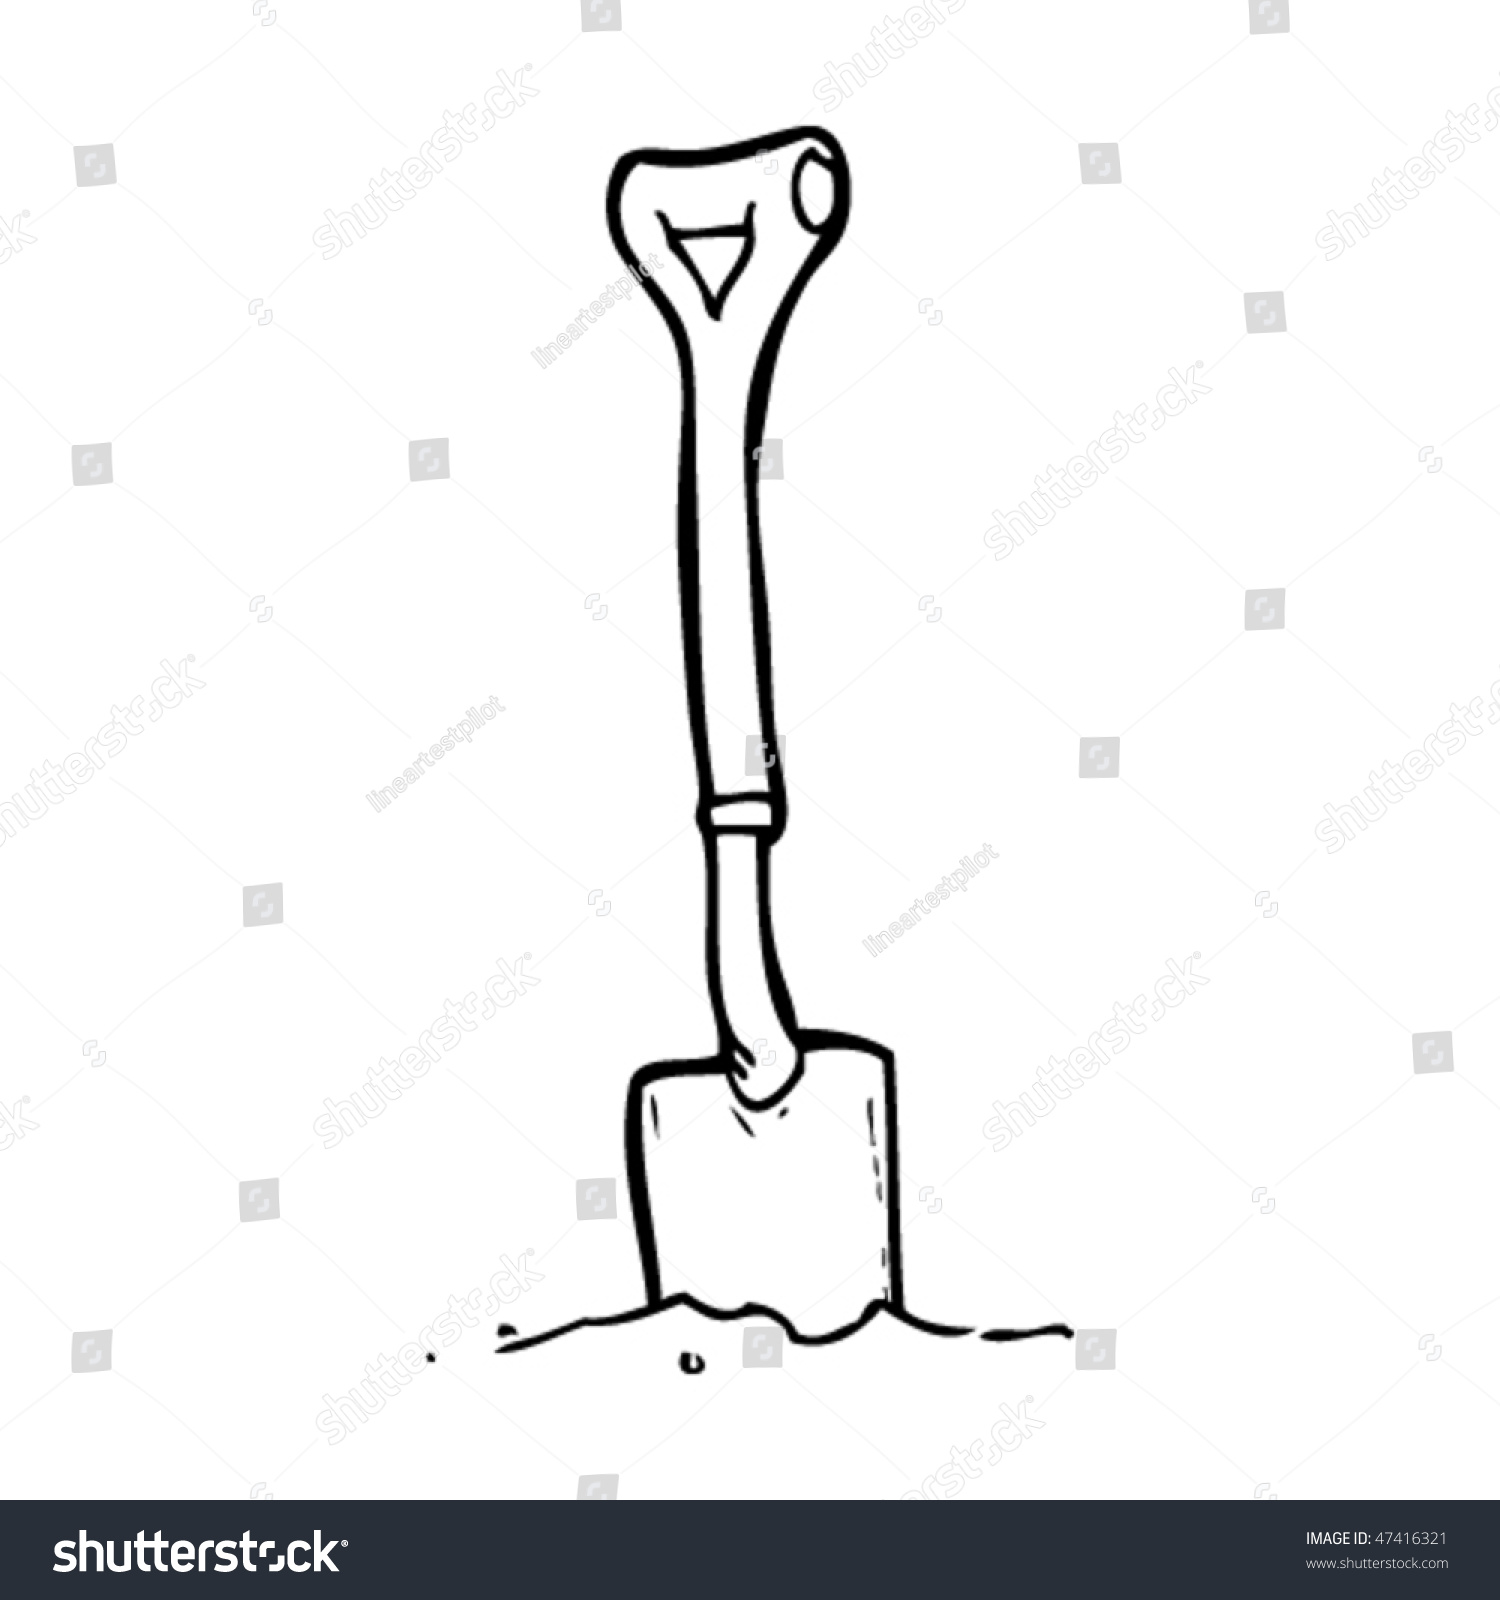 Drawing Spade Stock Vector (Royalty Free) 47416321 Shutterstock